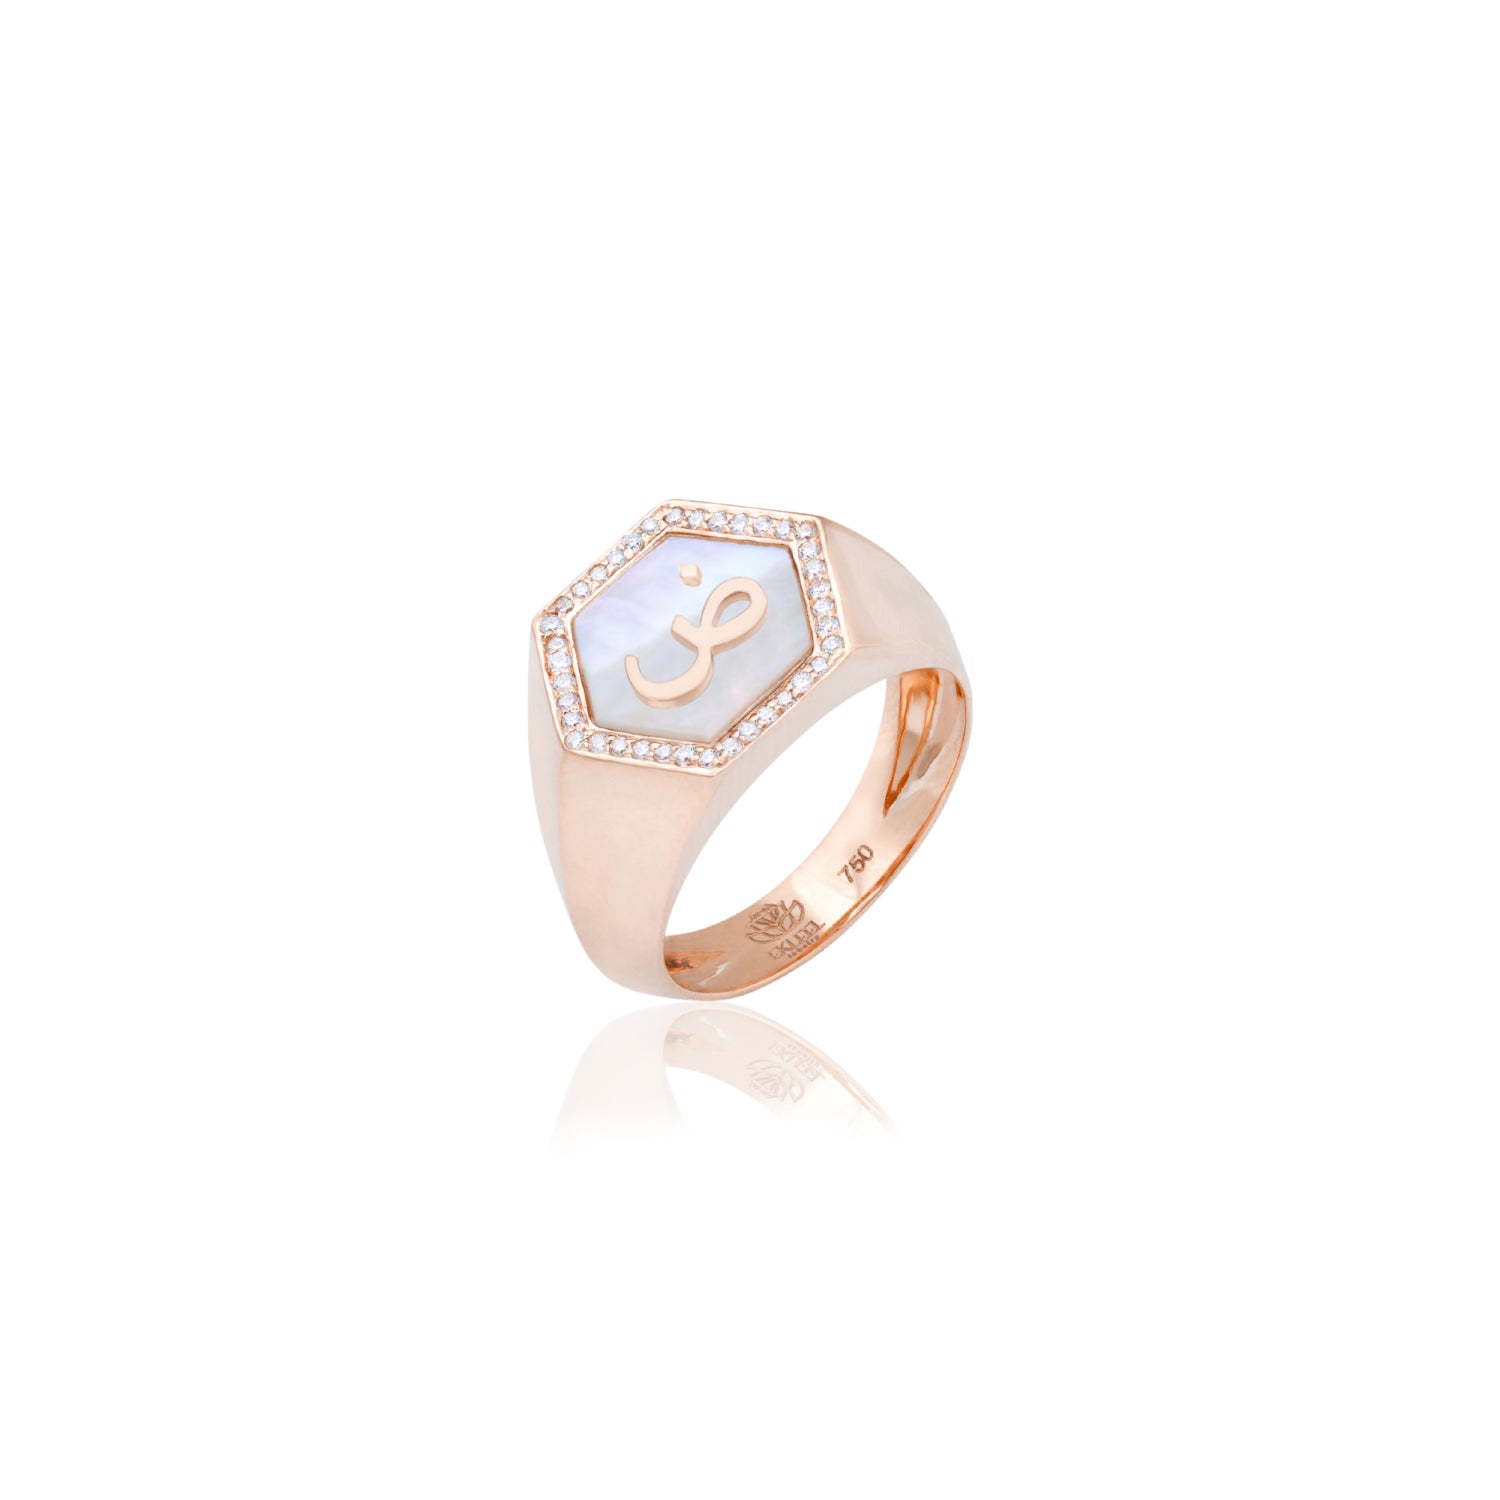 Qamoos 2.0 Letter ض White Mother of Pearl and Diamond Signet Ring in Rose Gold